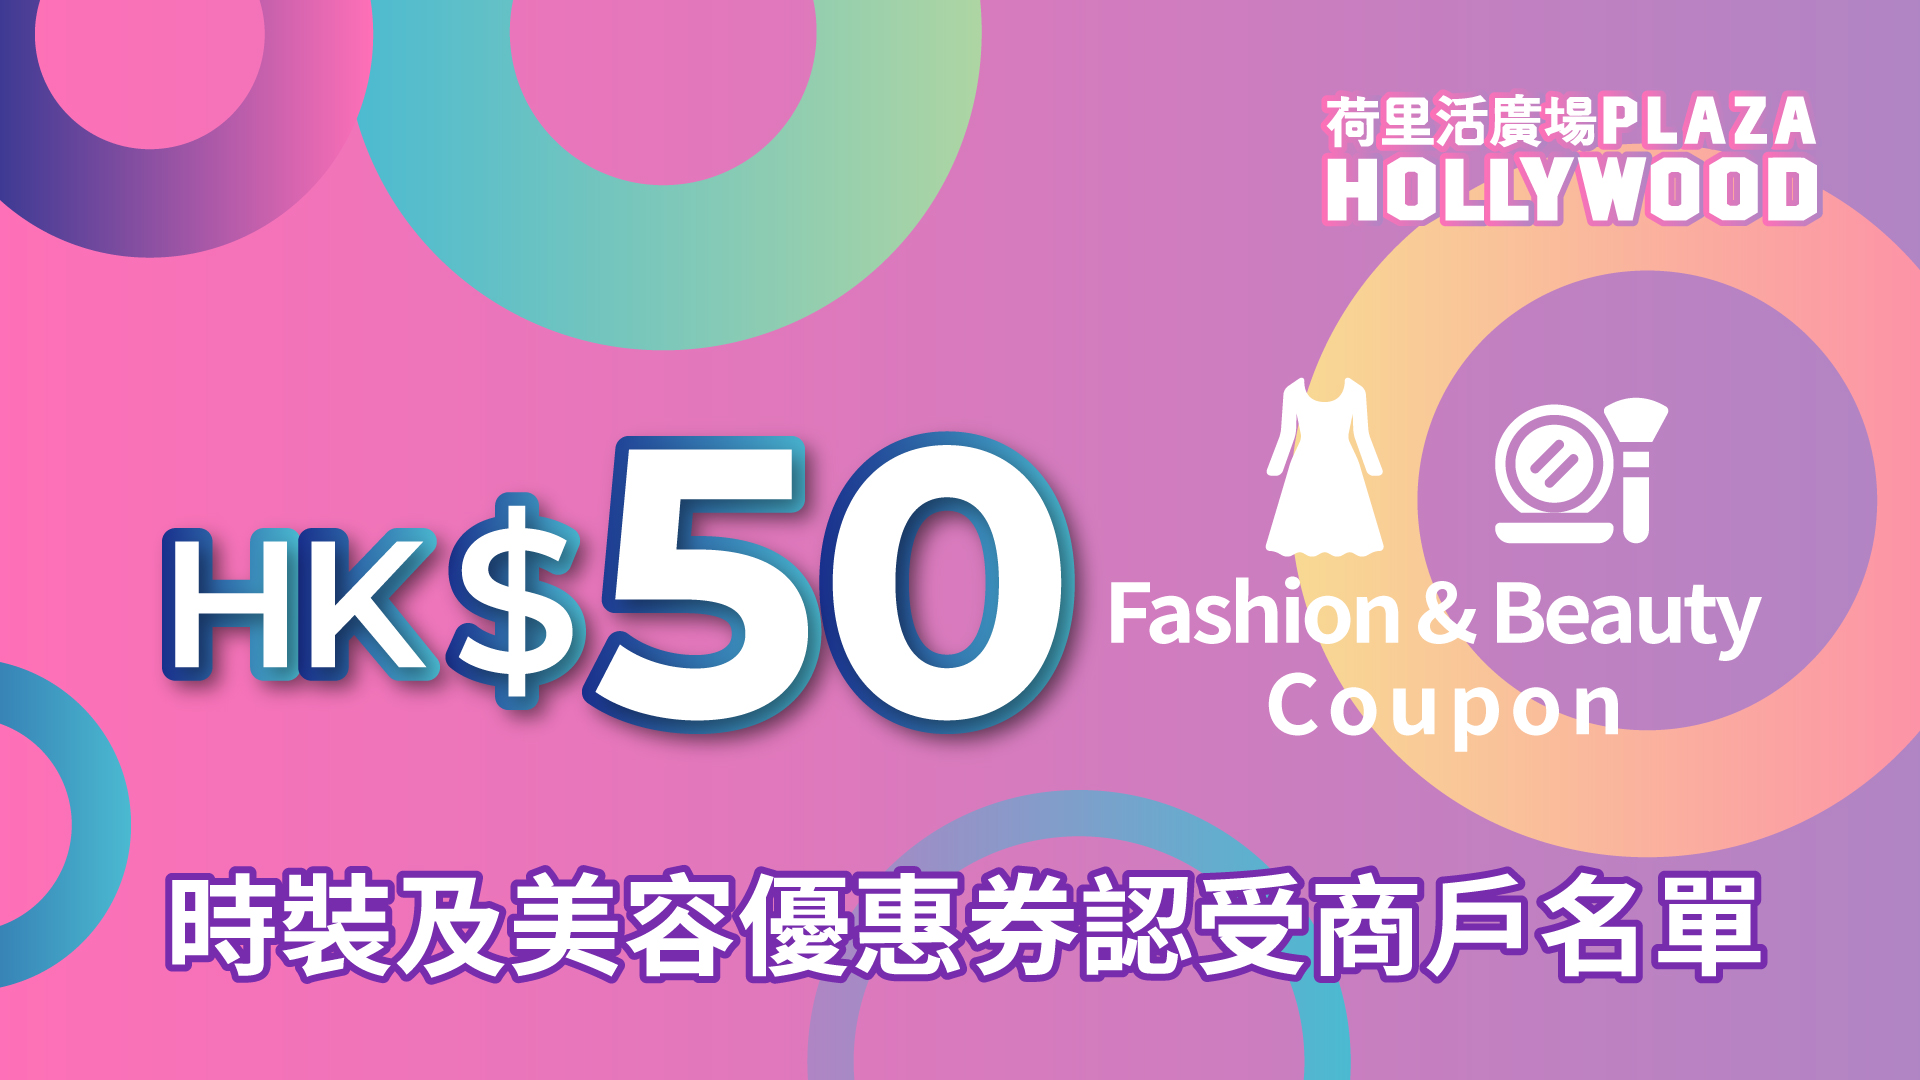 Plaza Hollywood Fashion & Beauty HK$50 Conditional Coupon - Participating designated outlets at Plaza Hollywood